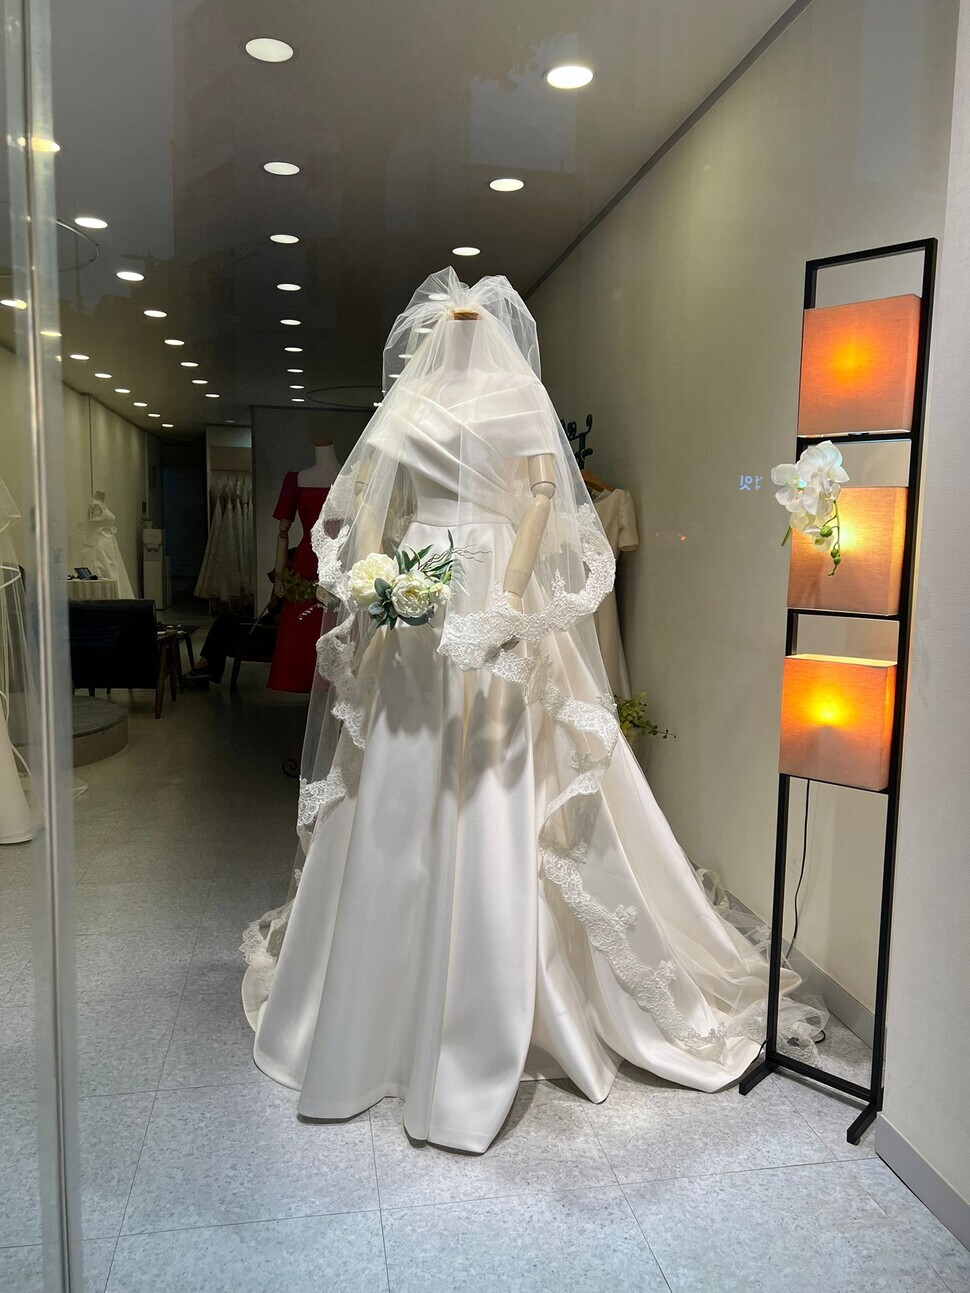 The wedding dress for Oksana picked out by Oliana, Elena and Yegor. (courtesy of the deceased’s family)